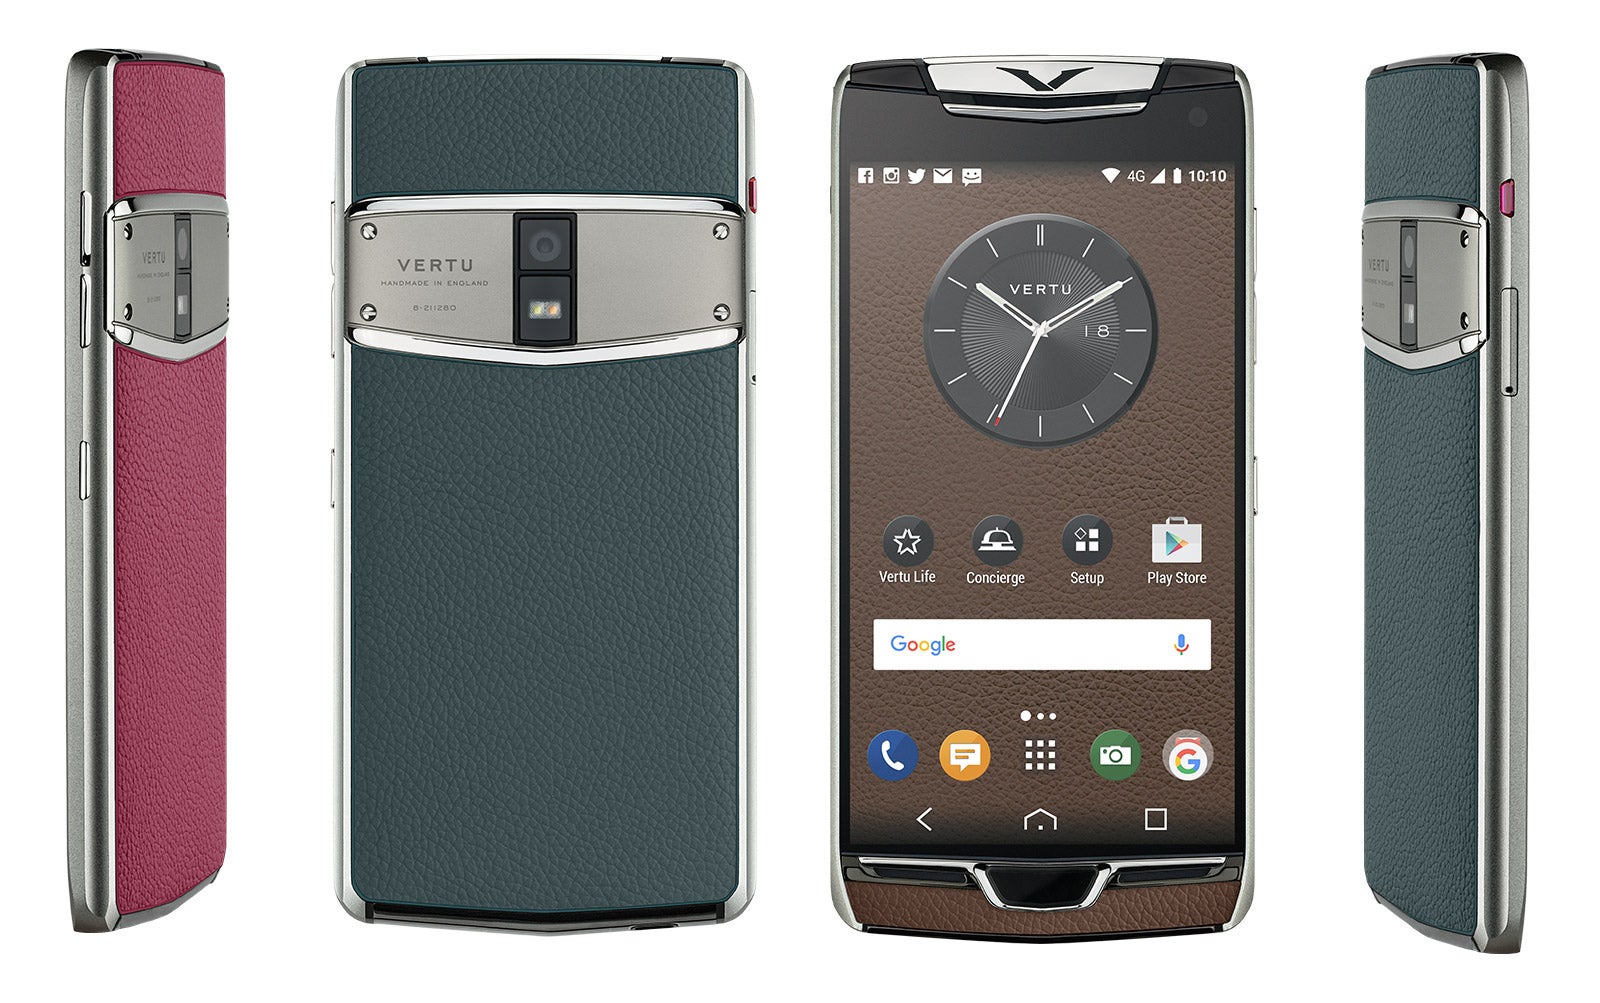 The Vertu Constellation combines high-end specs with a glorious design (likely for a lot of money)